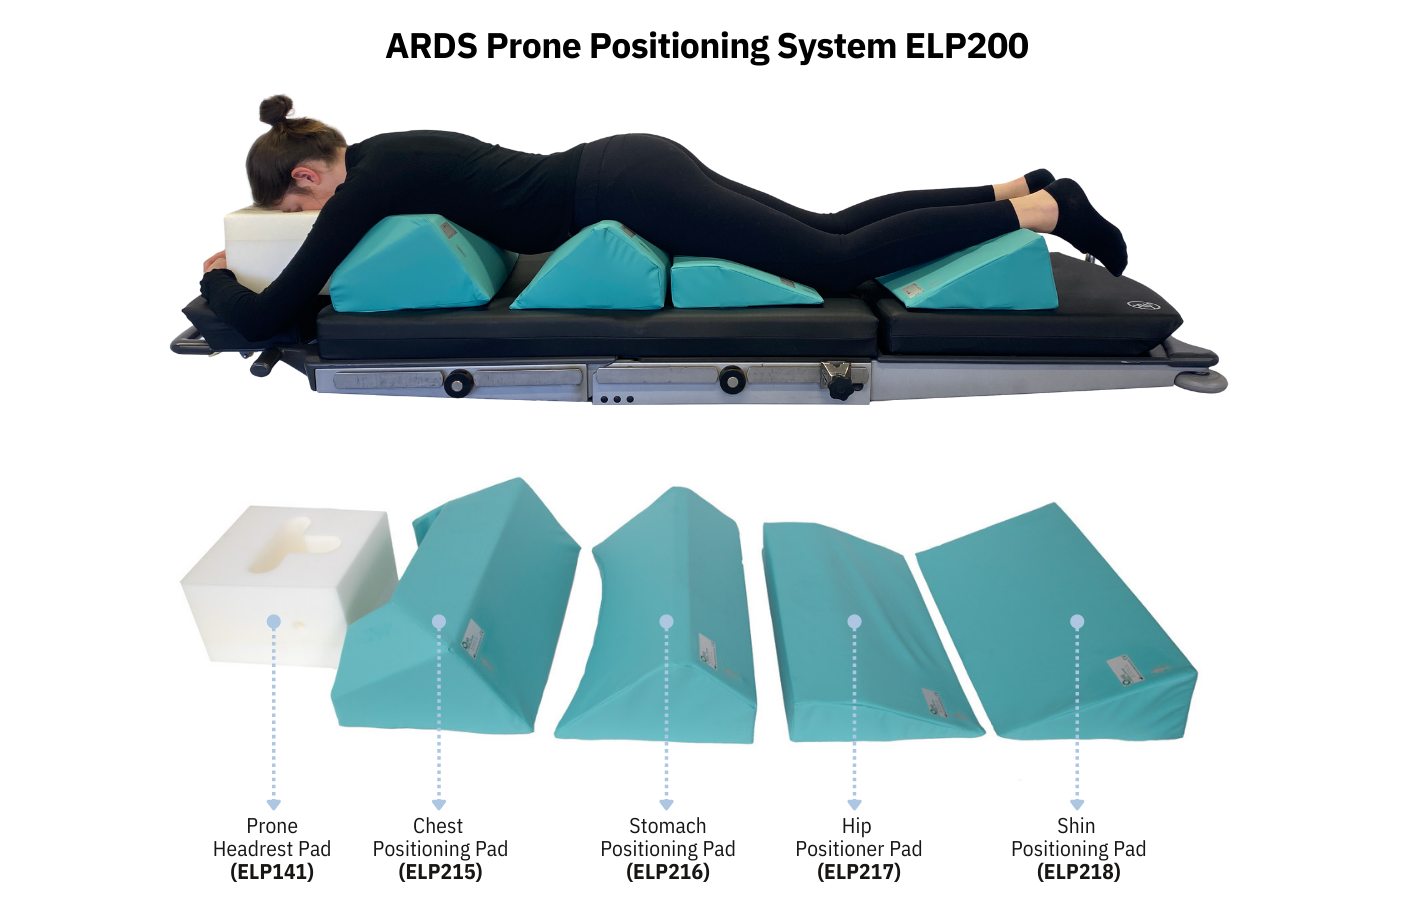 ARDS Prone Positioning System ELP200